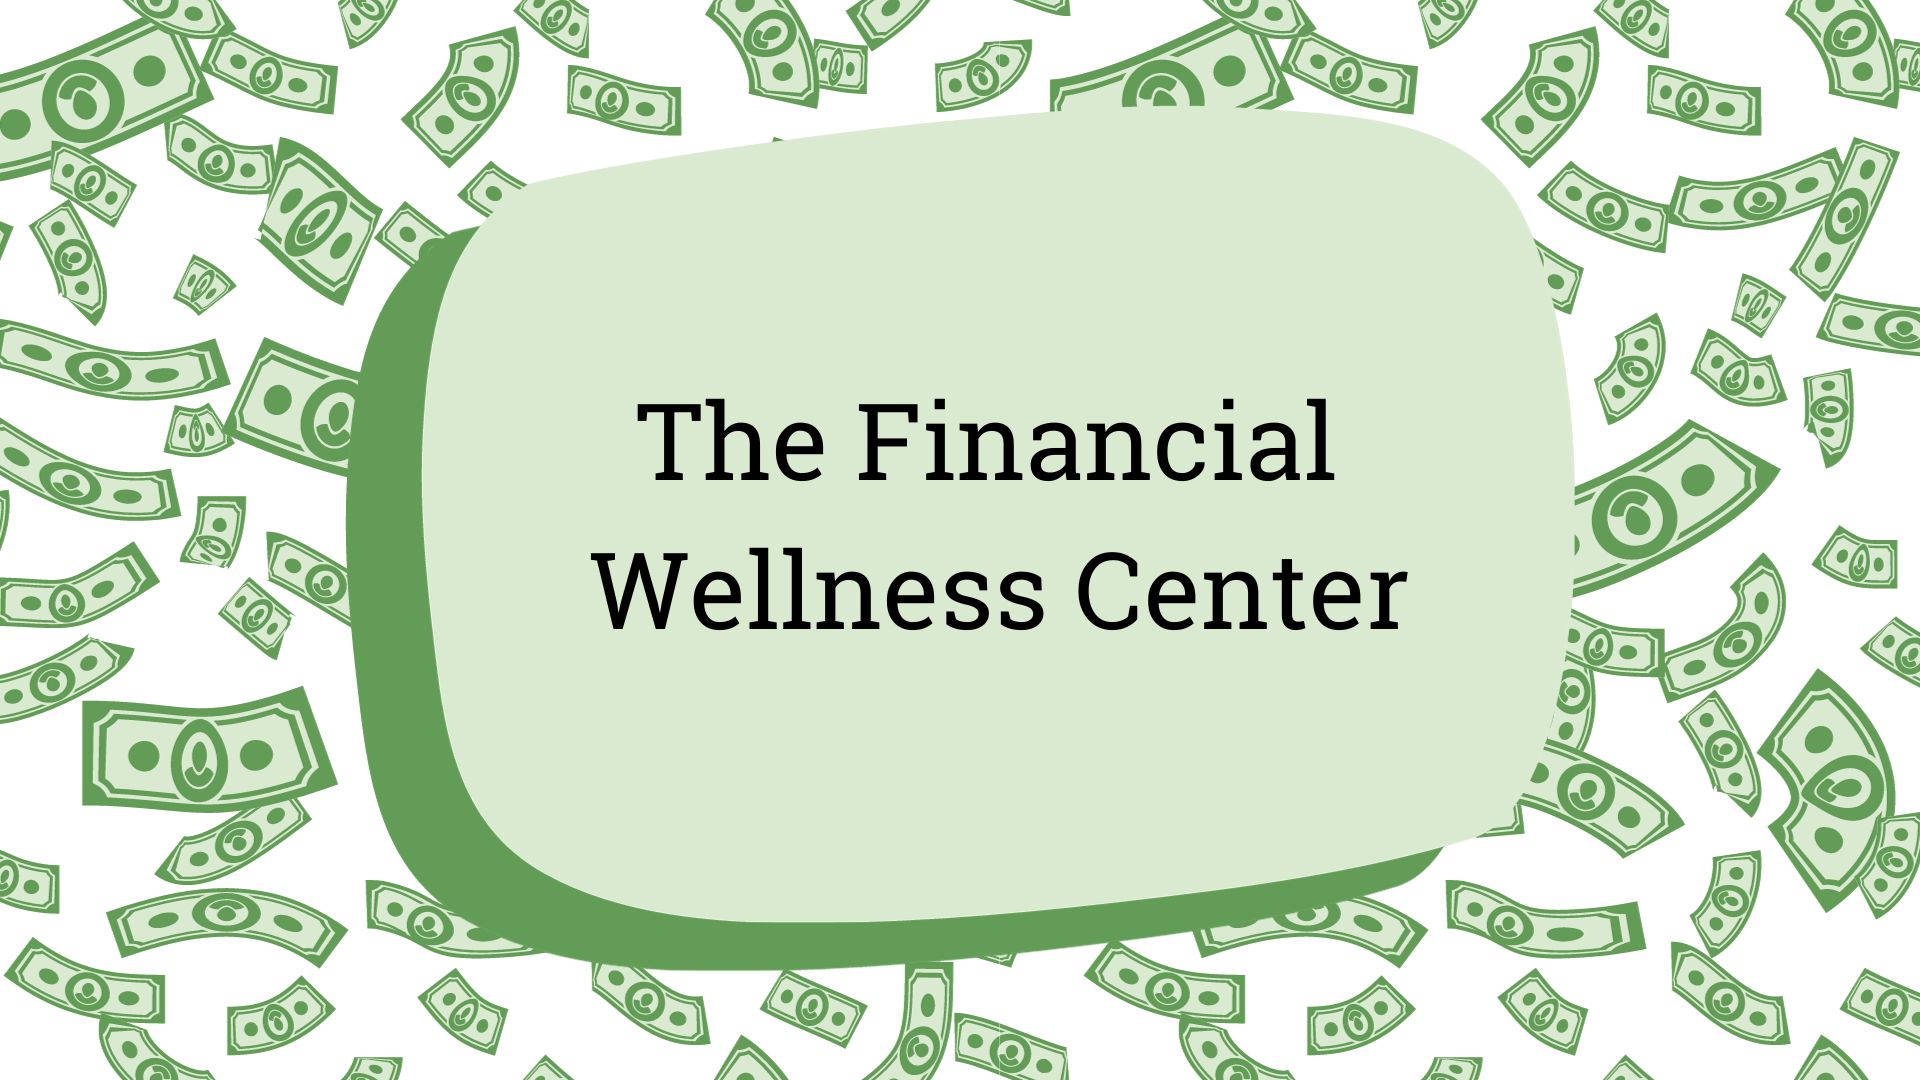 Image of cash backdrop with title, "The Financial Wellness Center" outlined in green.